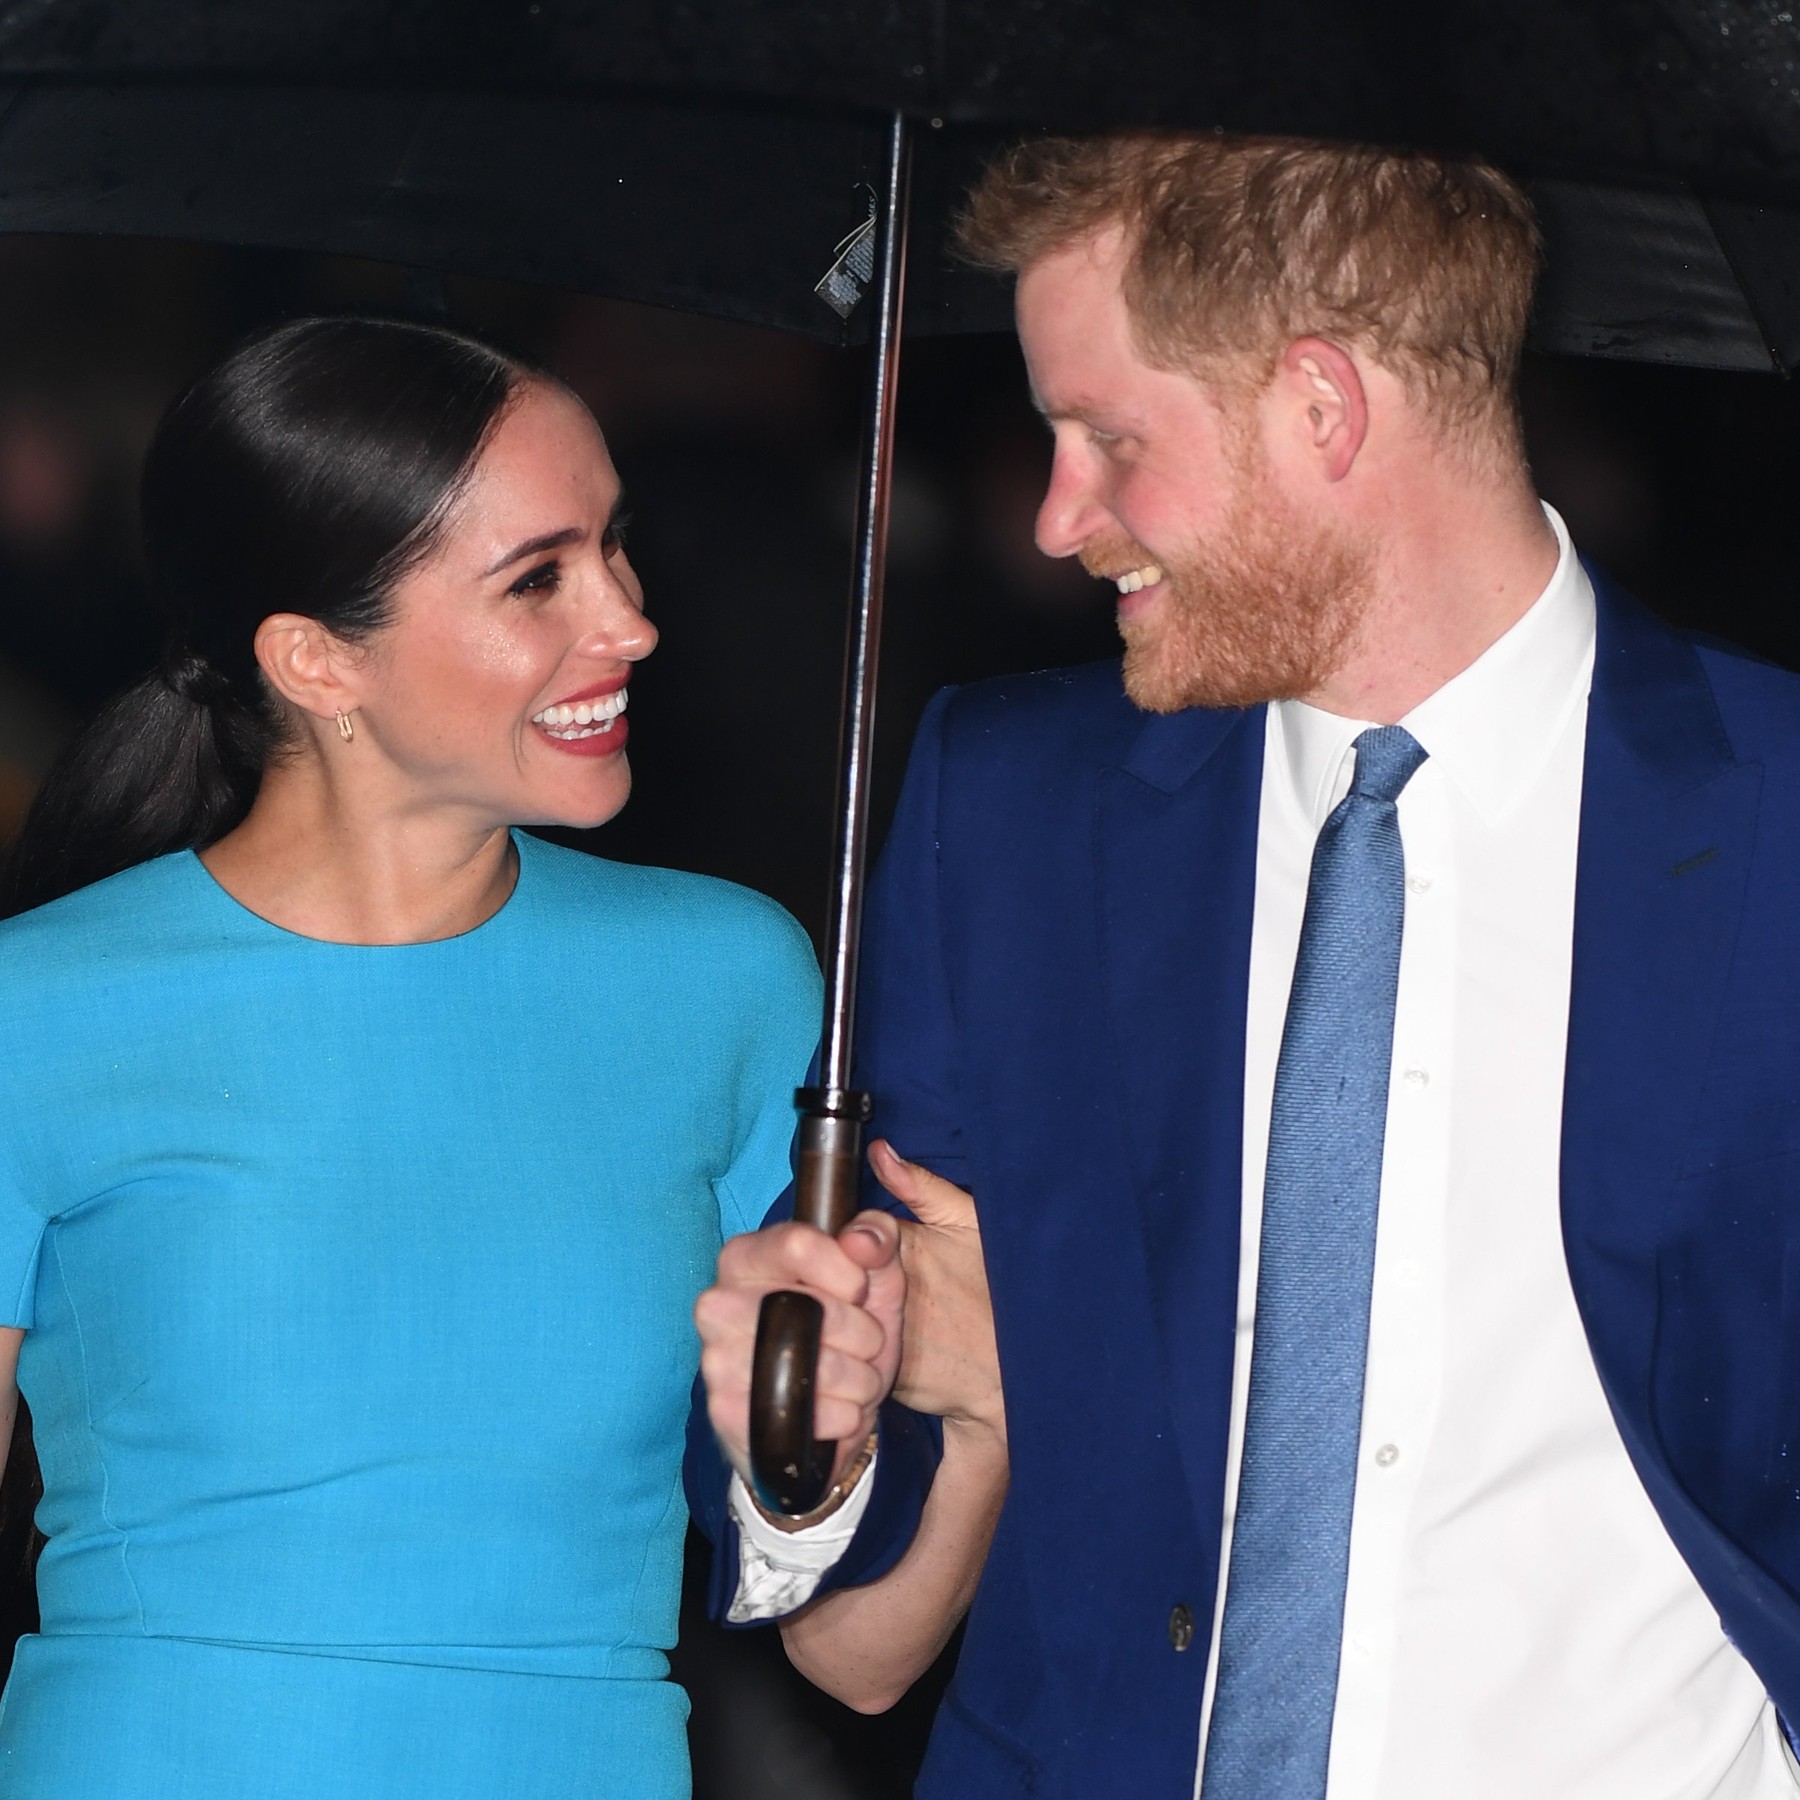 Prince Harry, Duke of Sussex, and Meghan Markle, Duchess of Sussex, attend the annual Endeavour Fund Awards at Mansion House, London, UK, on the 5th March 2020.
05 Mar 2020, Image: 503575586, License: Rights-managed, Restrictions: NO United Kingdom, Model Release: no, Credit line: James Whatling / The Mega Agency / Profimedia